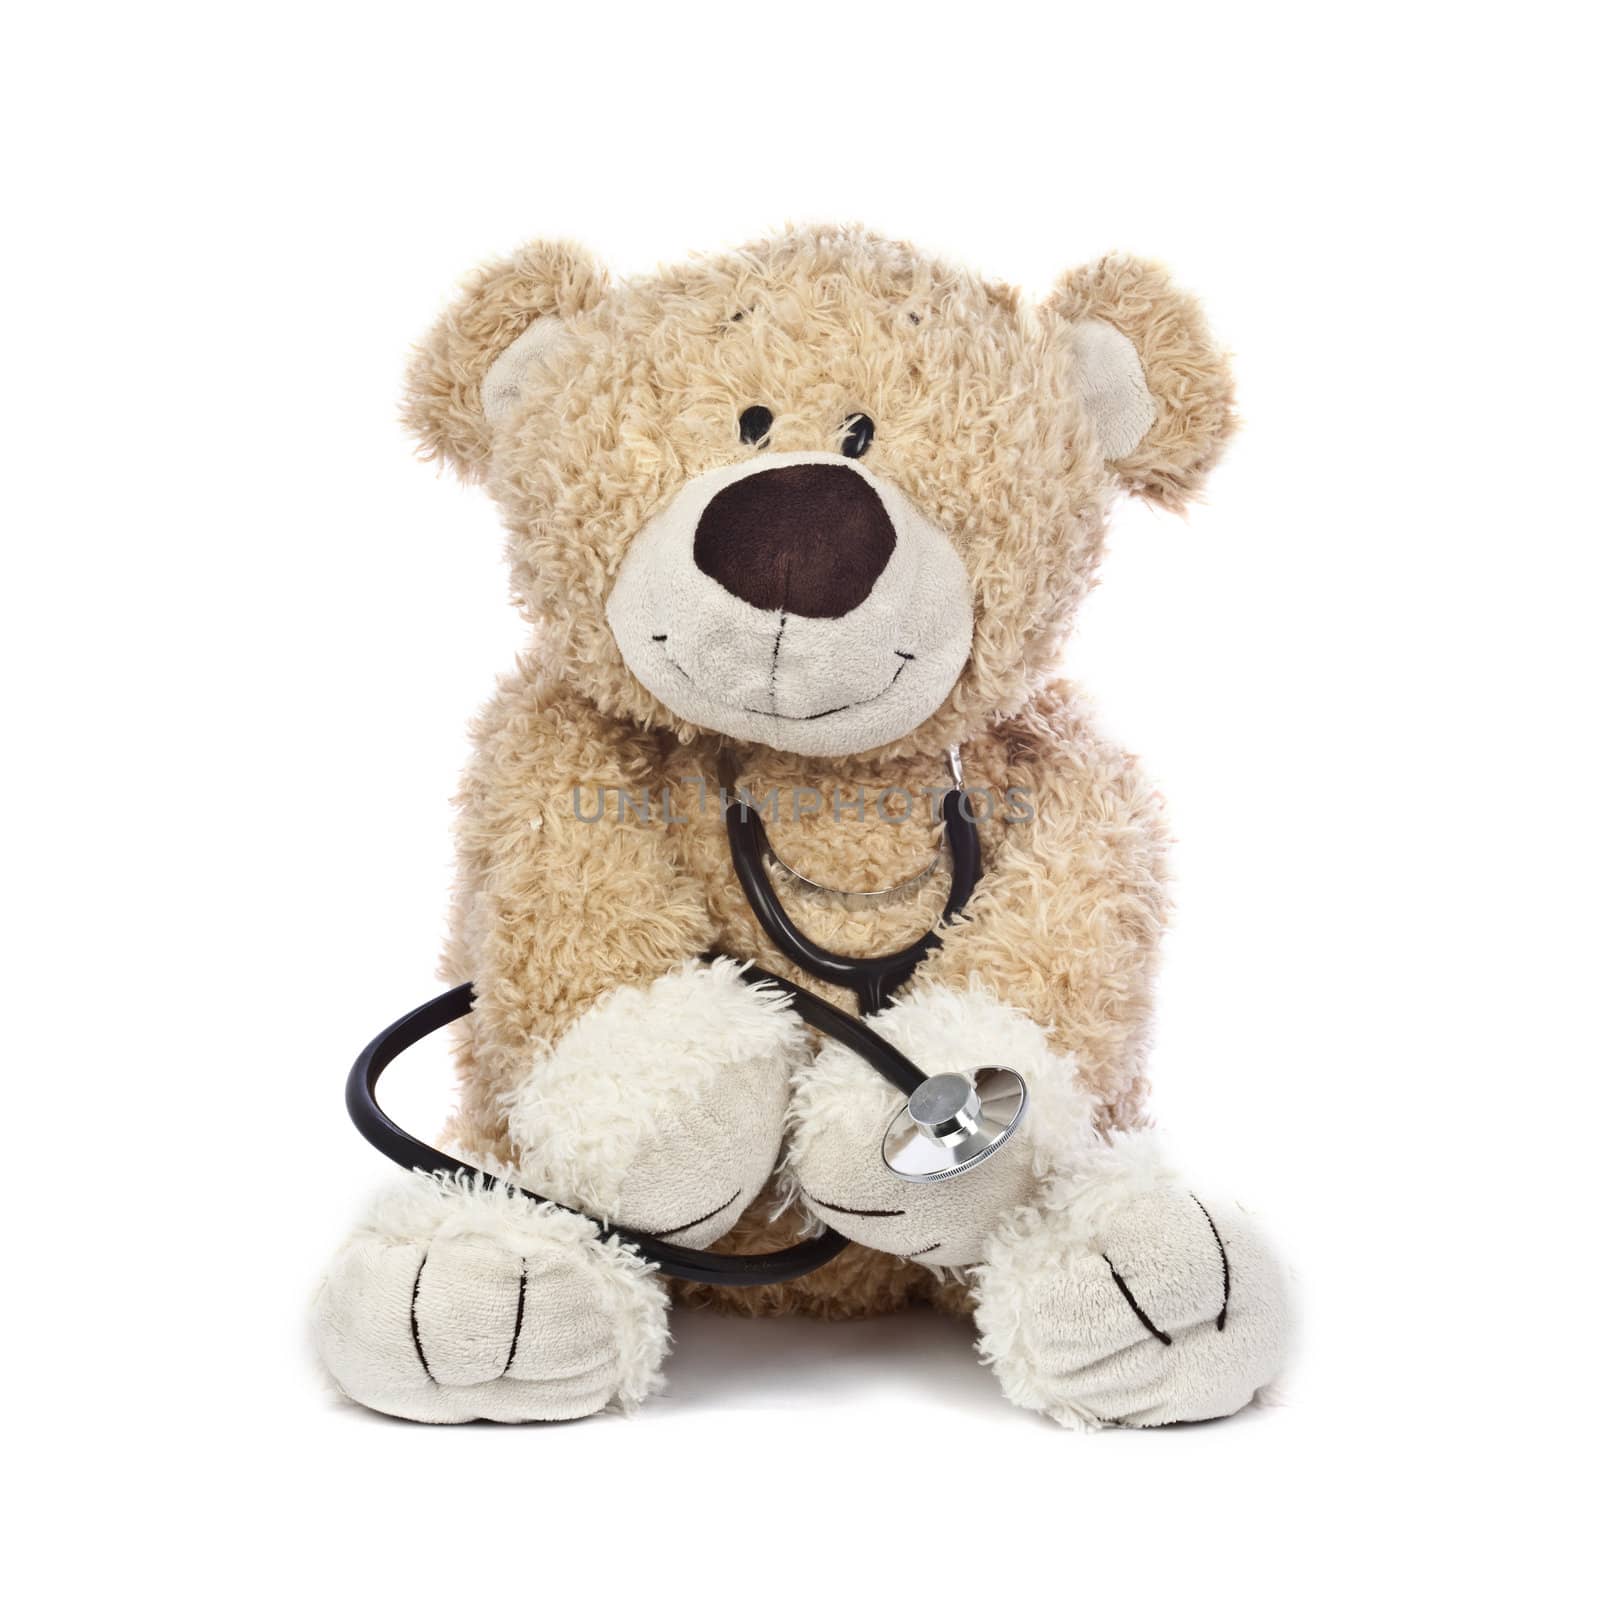 An adorable teddy bear, isolated on white, holding a stethoscope.